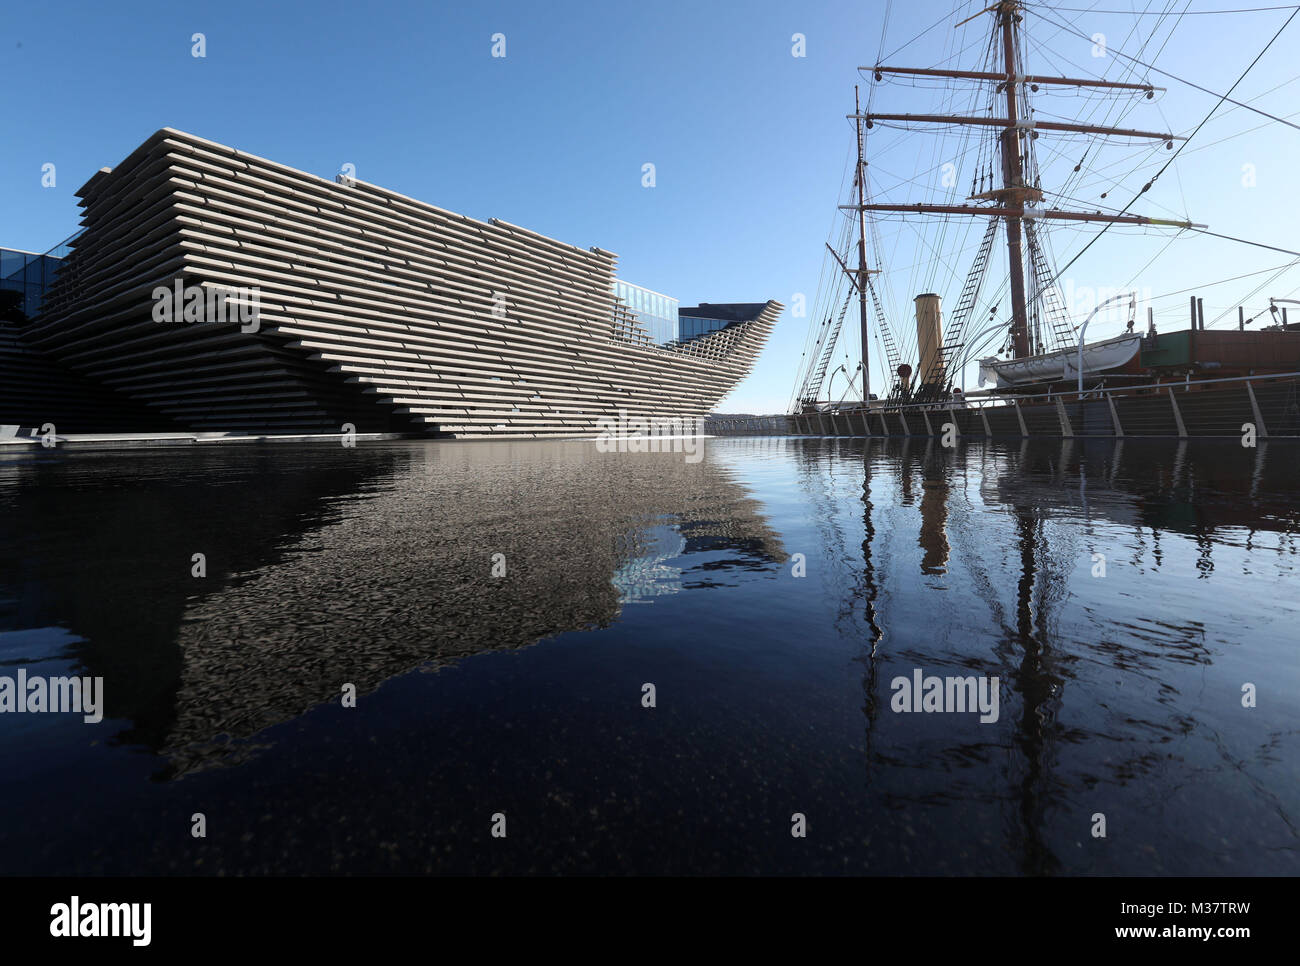 A general view of the finished exterior of the new eighty million pound V&A Dundee museum as it sits next to the ship Discovery during a visit by Japanese architect Kengo Kuma(not pictured). The designer met workers as the focus moves to the interior of the V&A, fitting out gallery spaces, a cafe and a restaurant ahead of its opening in September. Stock Photo